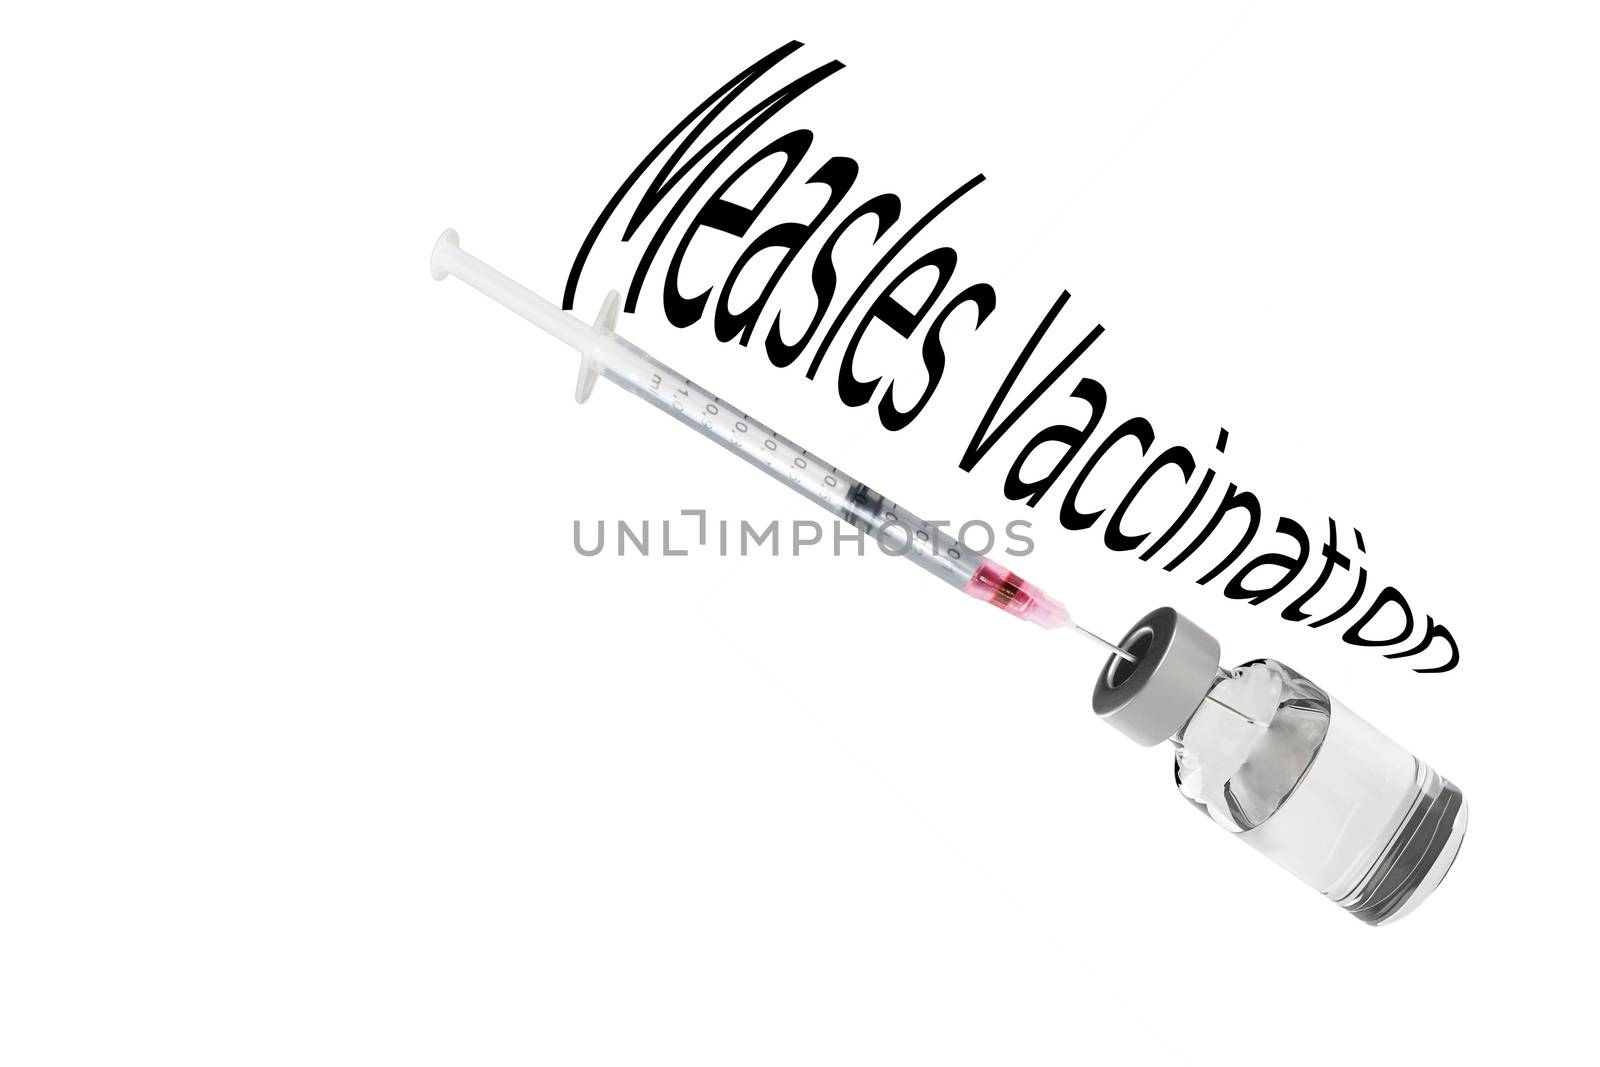 Syringe is filled with vaccine for measles vaccination.       by JFsPic